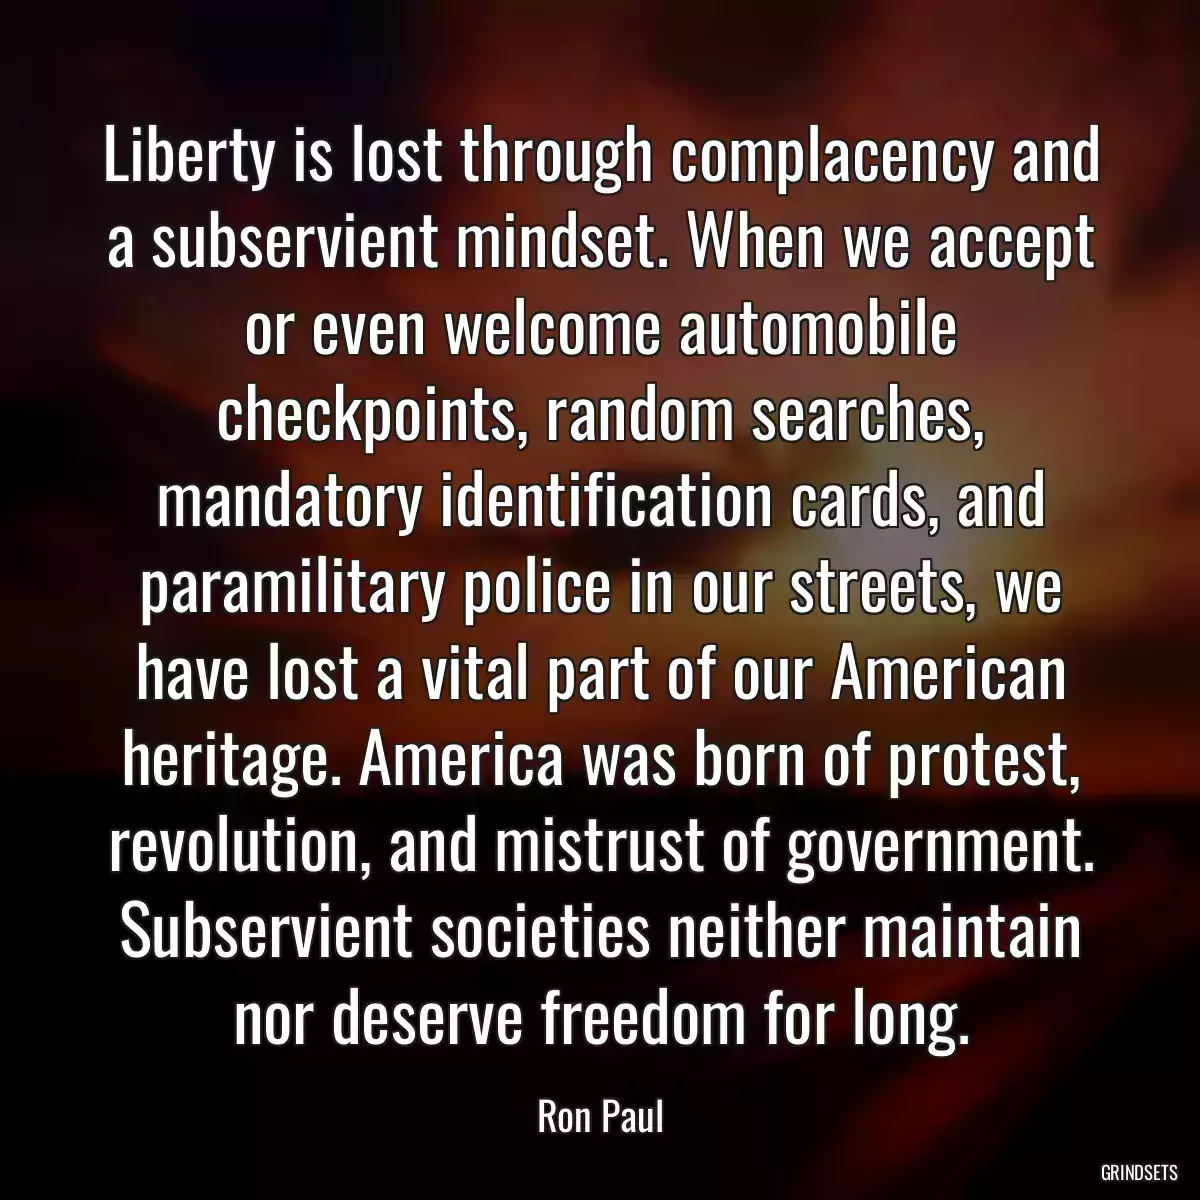 Liberty is lost through complacency and a subservient mindset. When we accept or even welcome automobile checkpoints, random searches, mandatory identification cards, and paramilitary police in our streets, we have lost a vital part of our American heritage. America was born of protest, revolution, and mistrust of government. Subservient societies neither maintain nor deserve freedom for long.